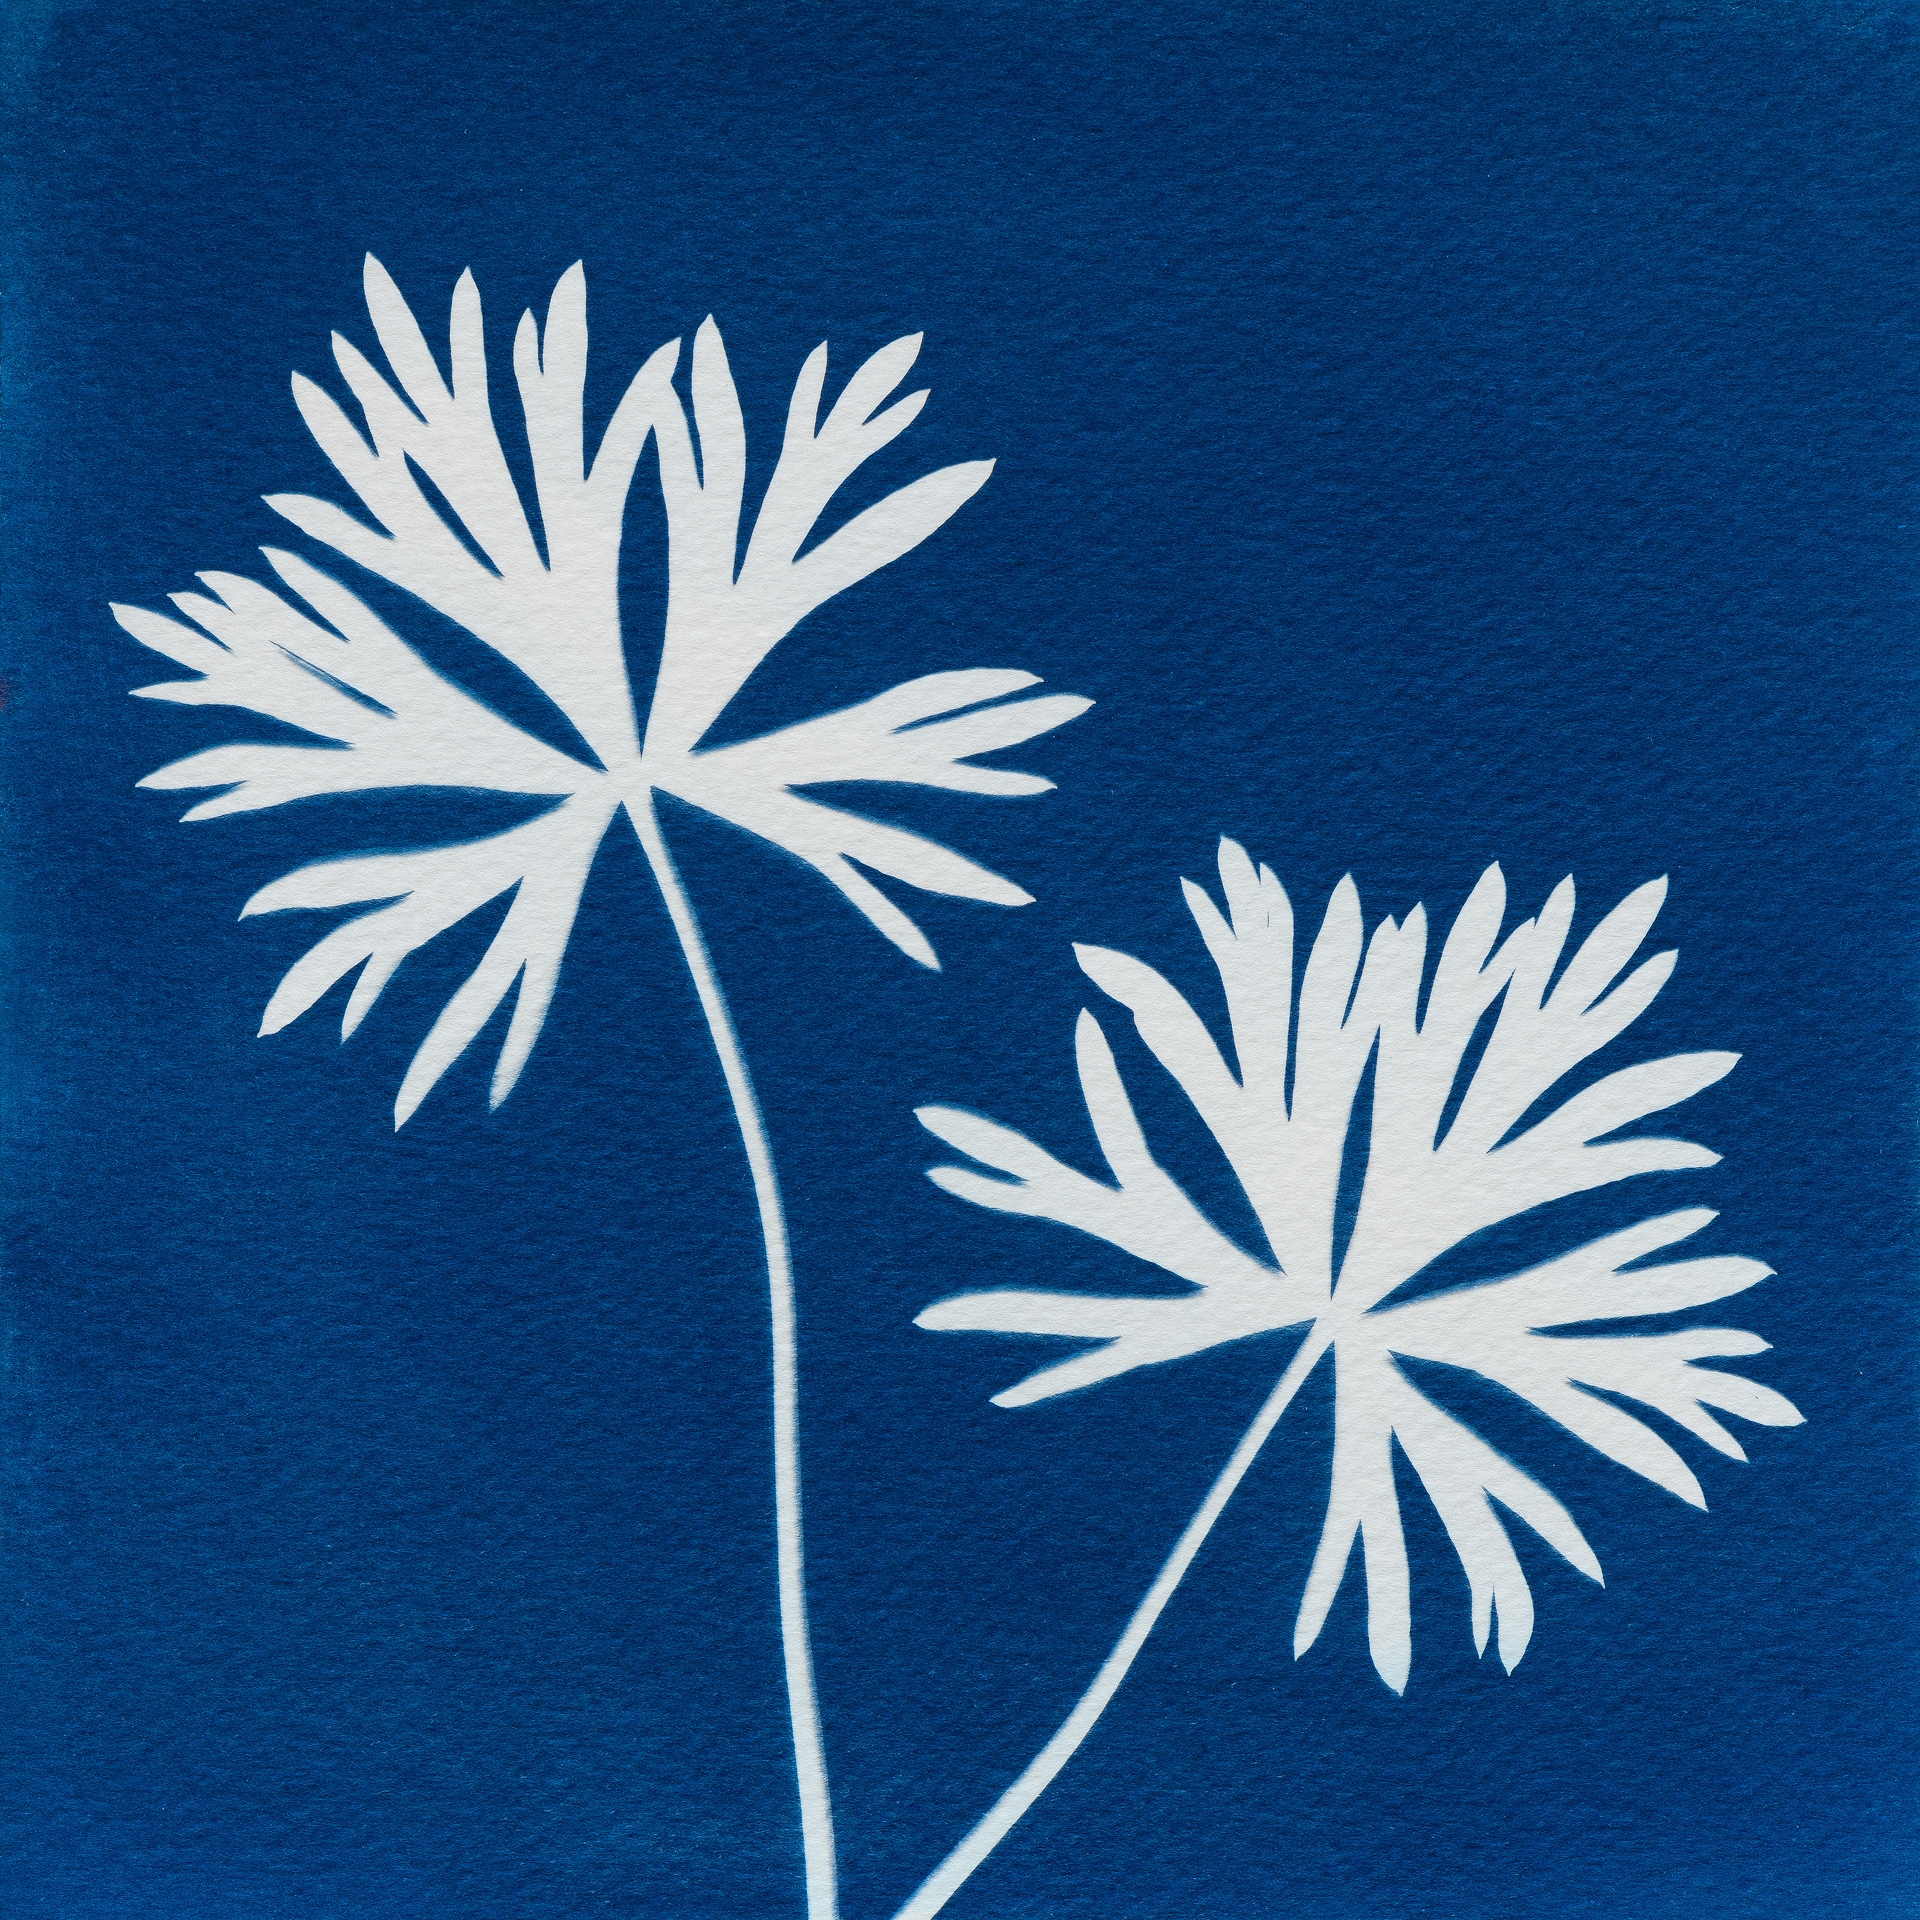 Life Images by Jill: Experimenting with wet cyanotype